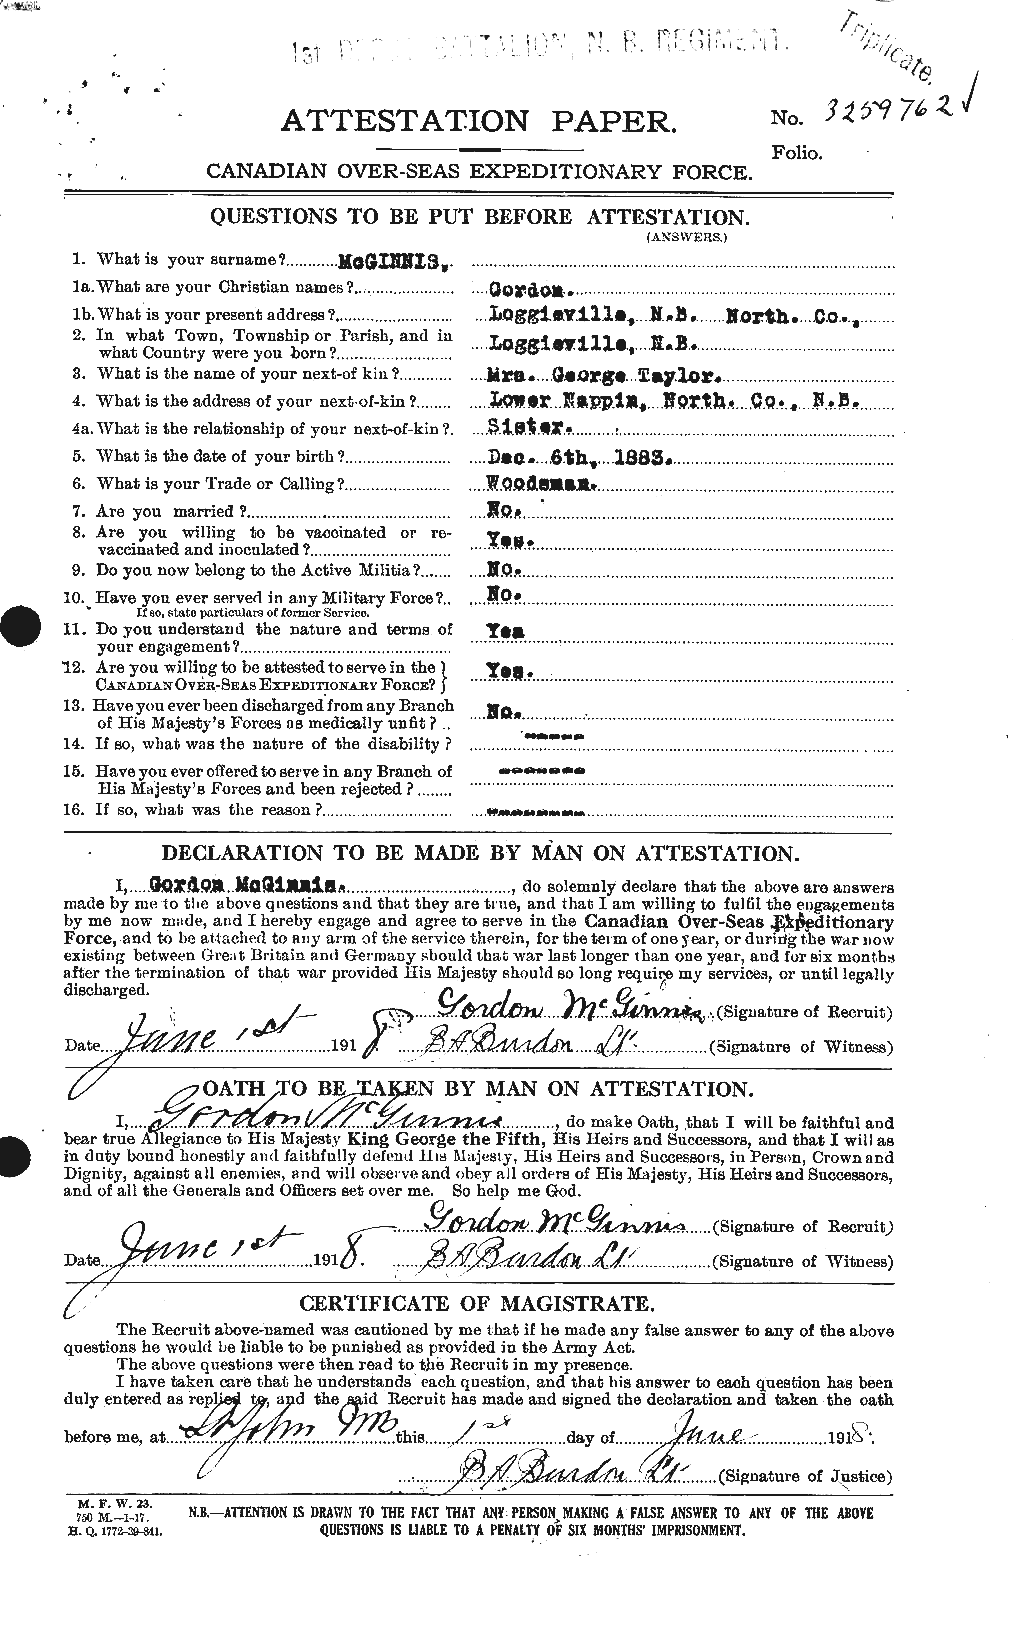 Personnel Records of the First World War - CEF 526387a